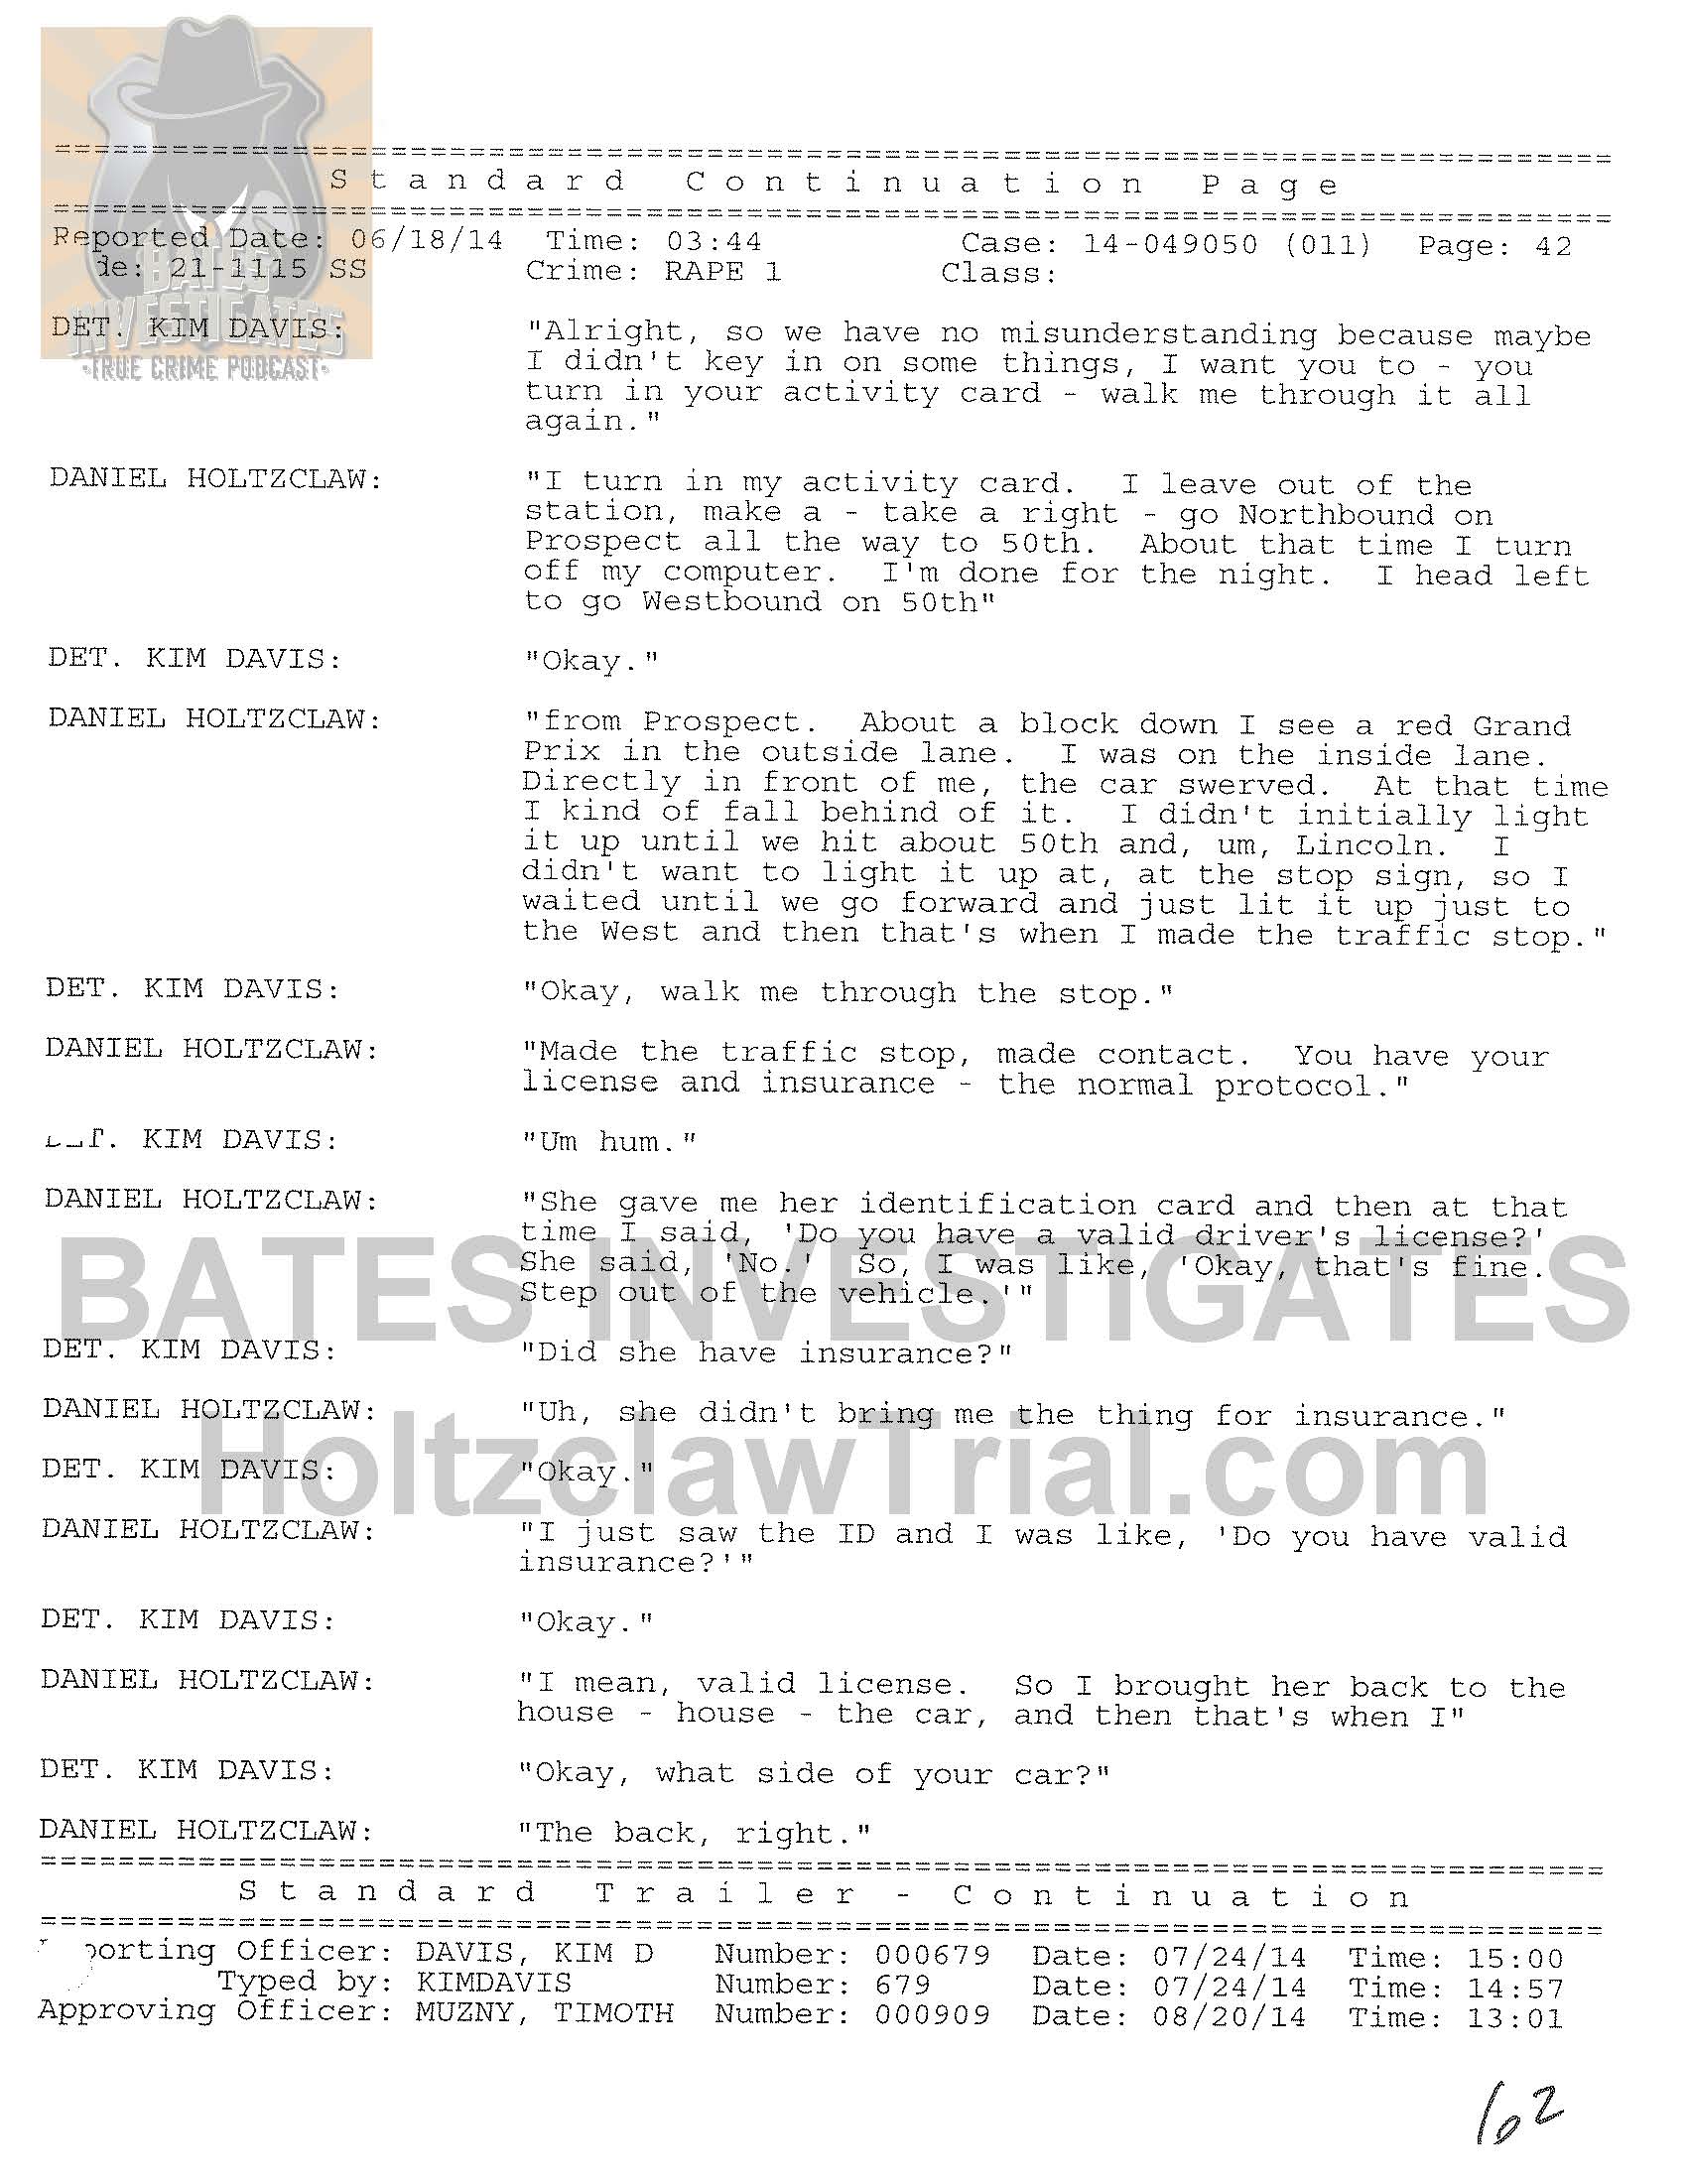 Holtzclaw Interrogation Transcript - Ep02 Redacted_Page_42.jpg